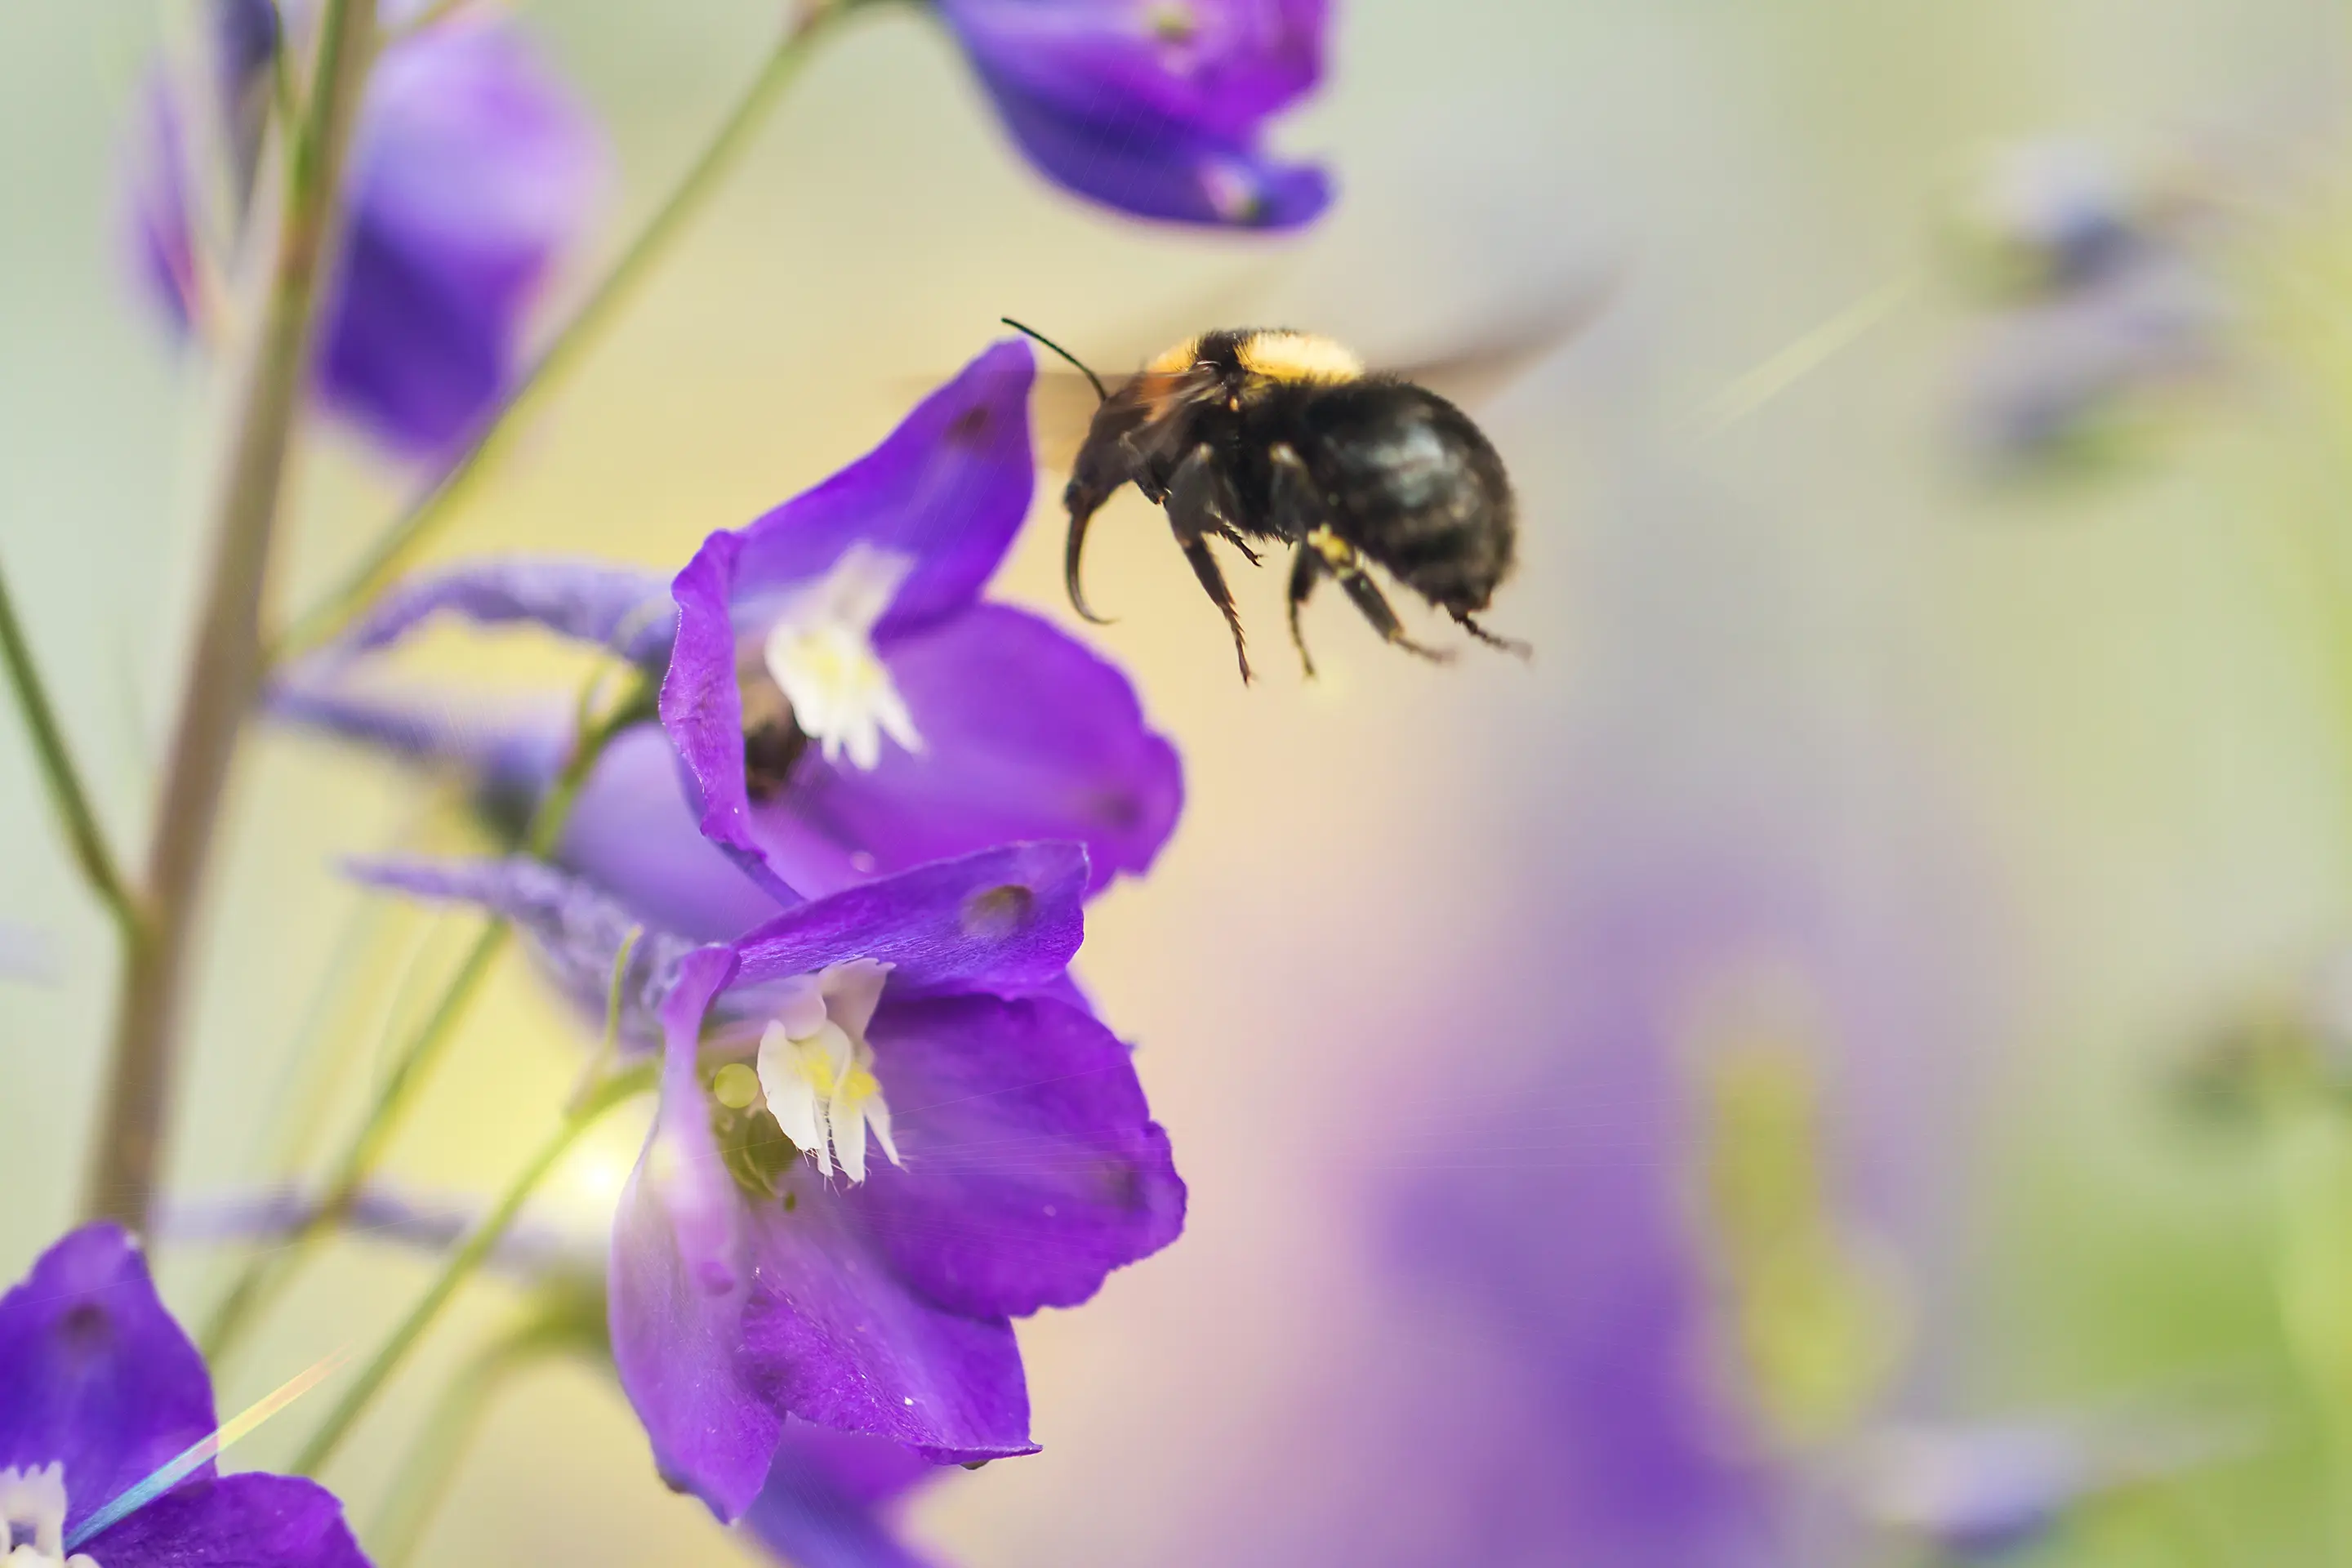 A bumblebee hovering in front of a purple flower